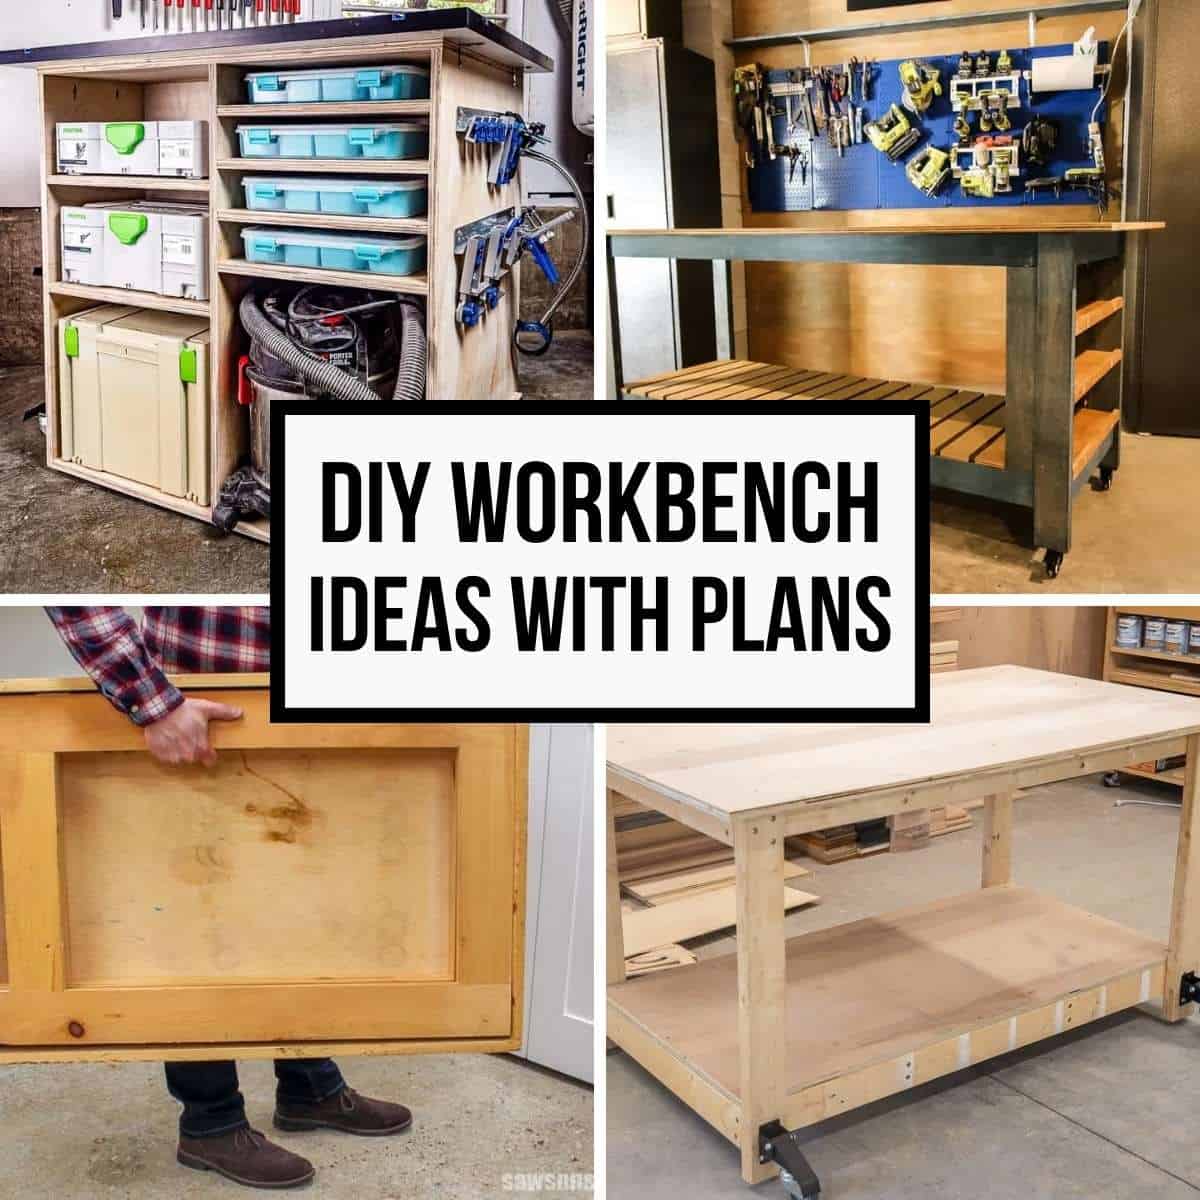 Woodworking Kits, Build-It-Yourself